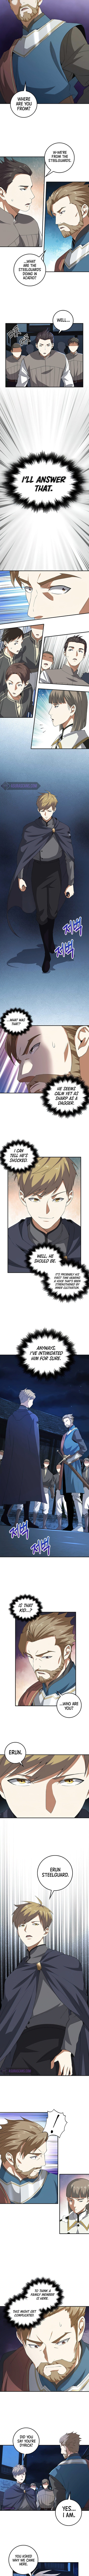 the-lords-coins-arent-decreasing-chap-34-2